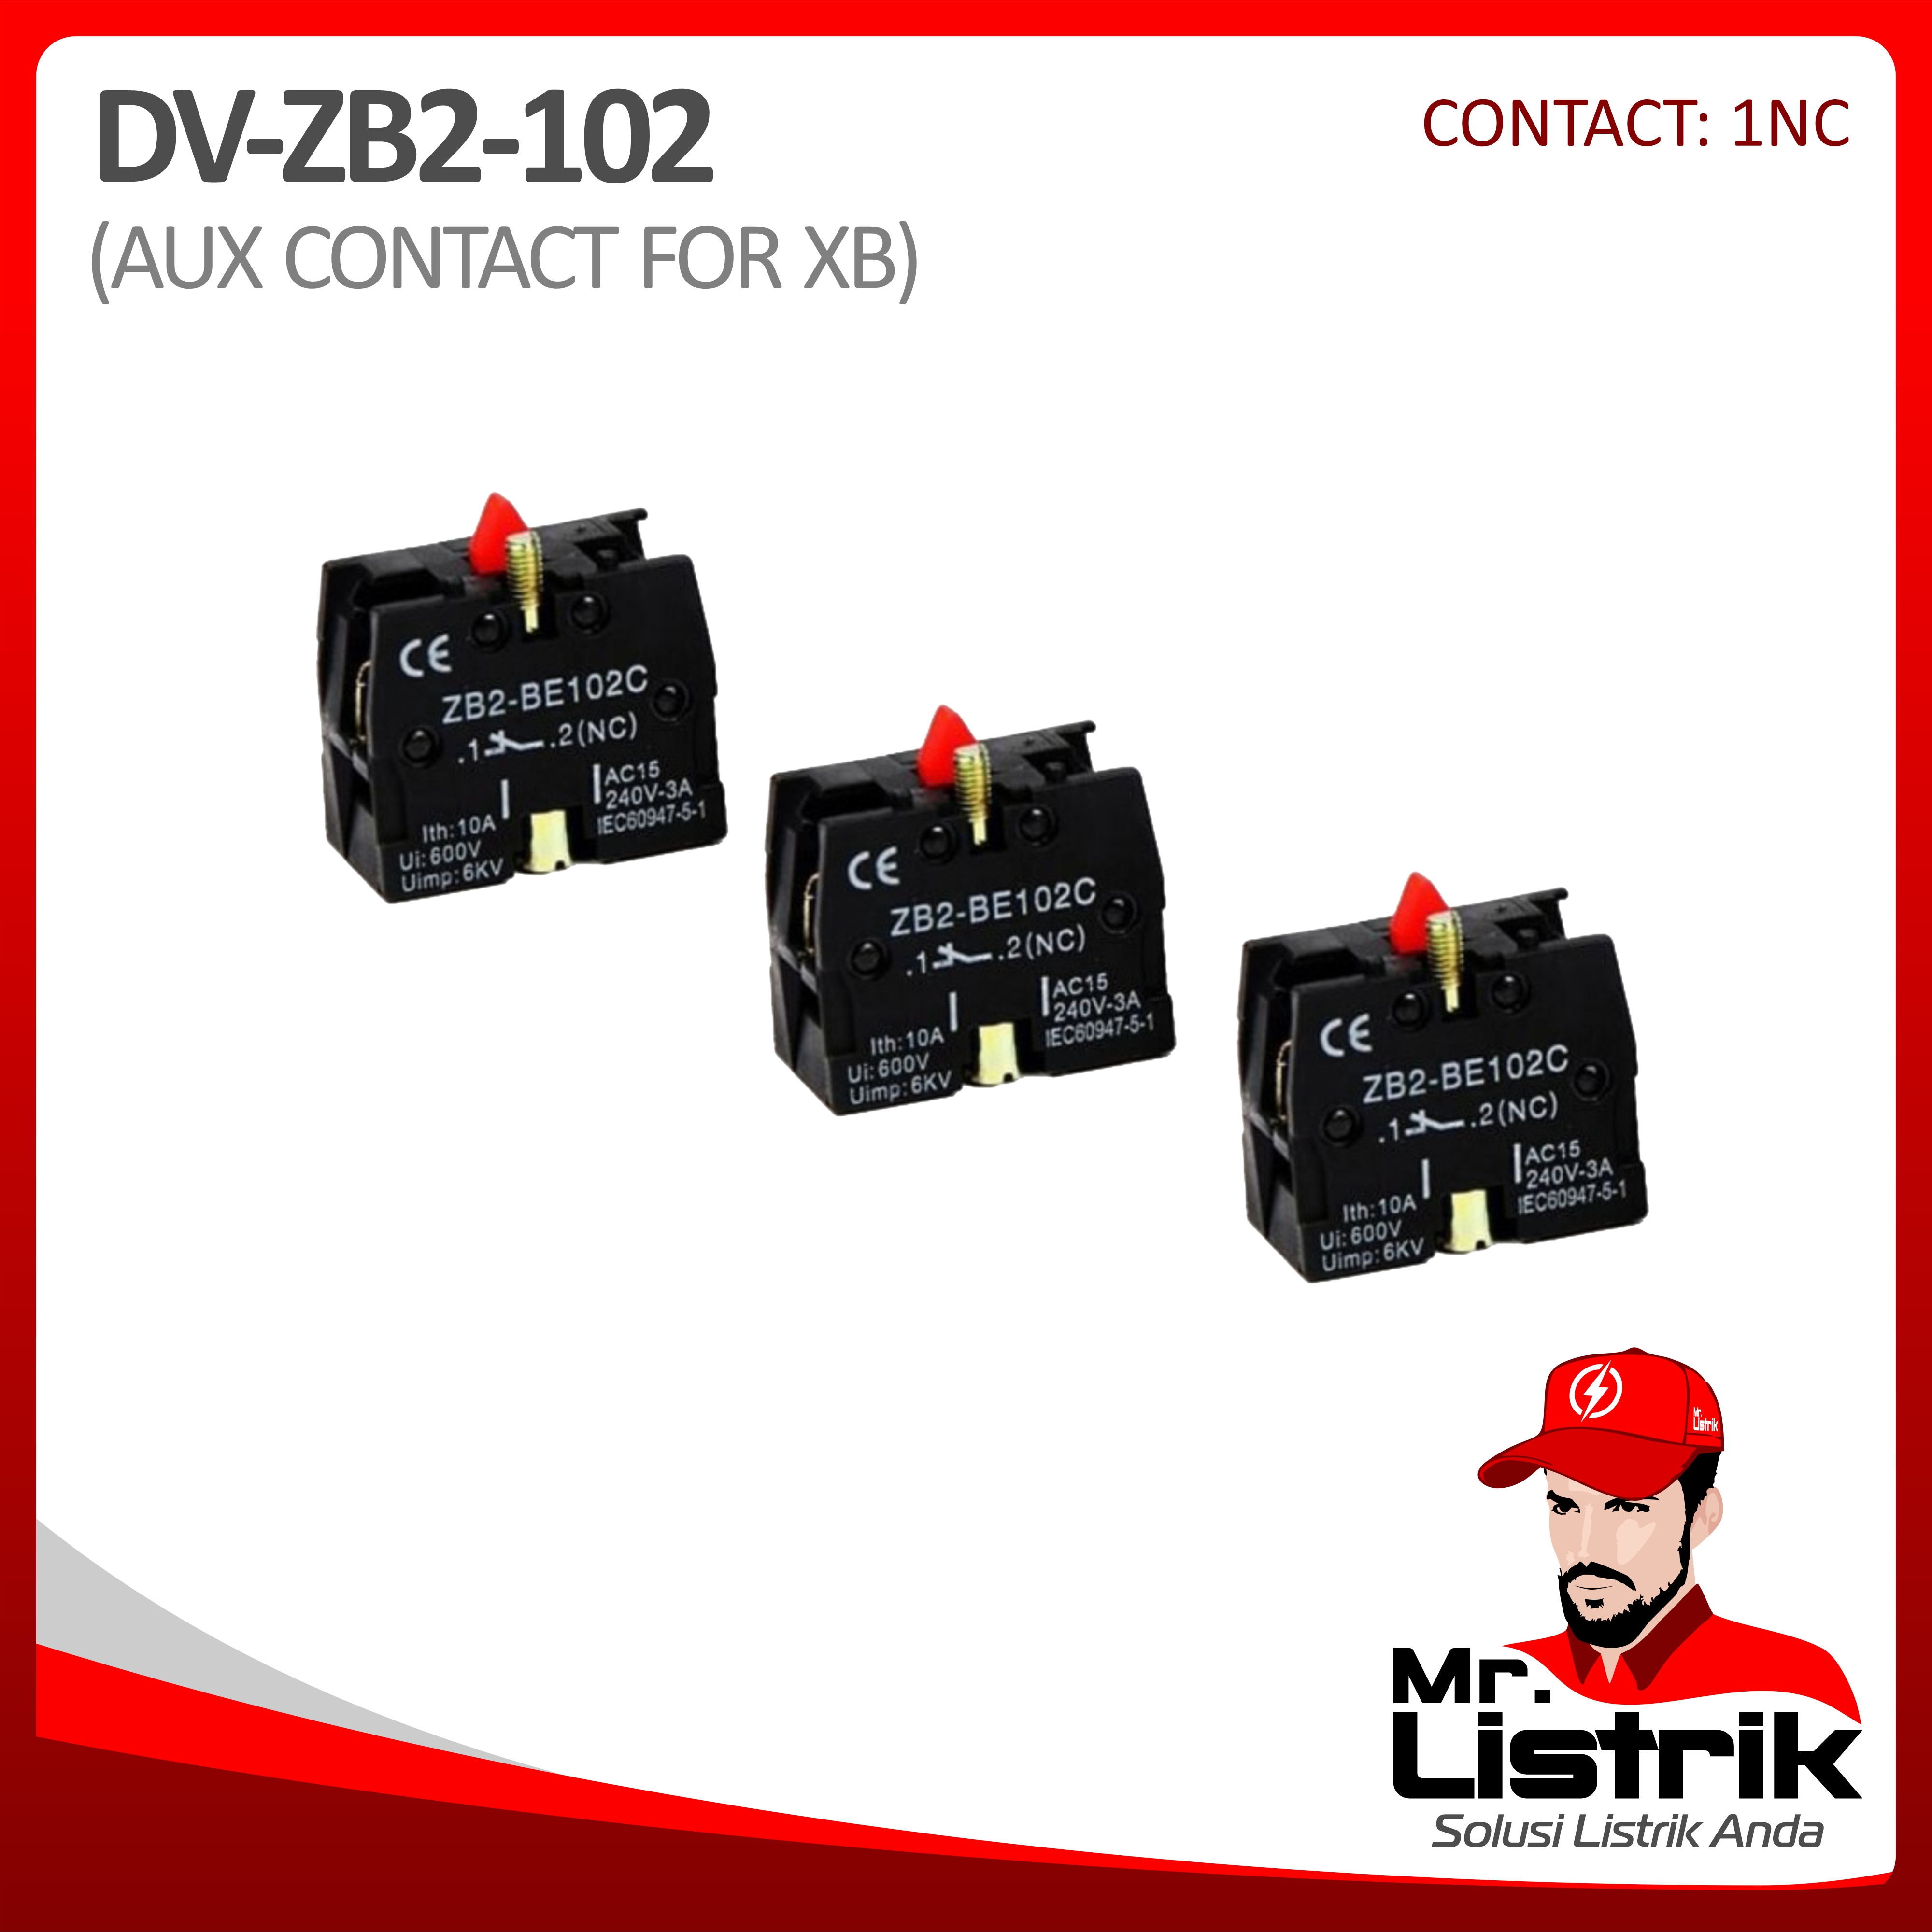 Aux Contact For XB 1NC ZB2-102